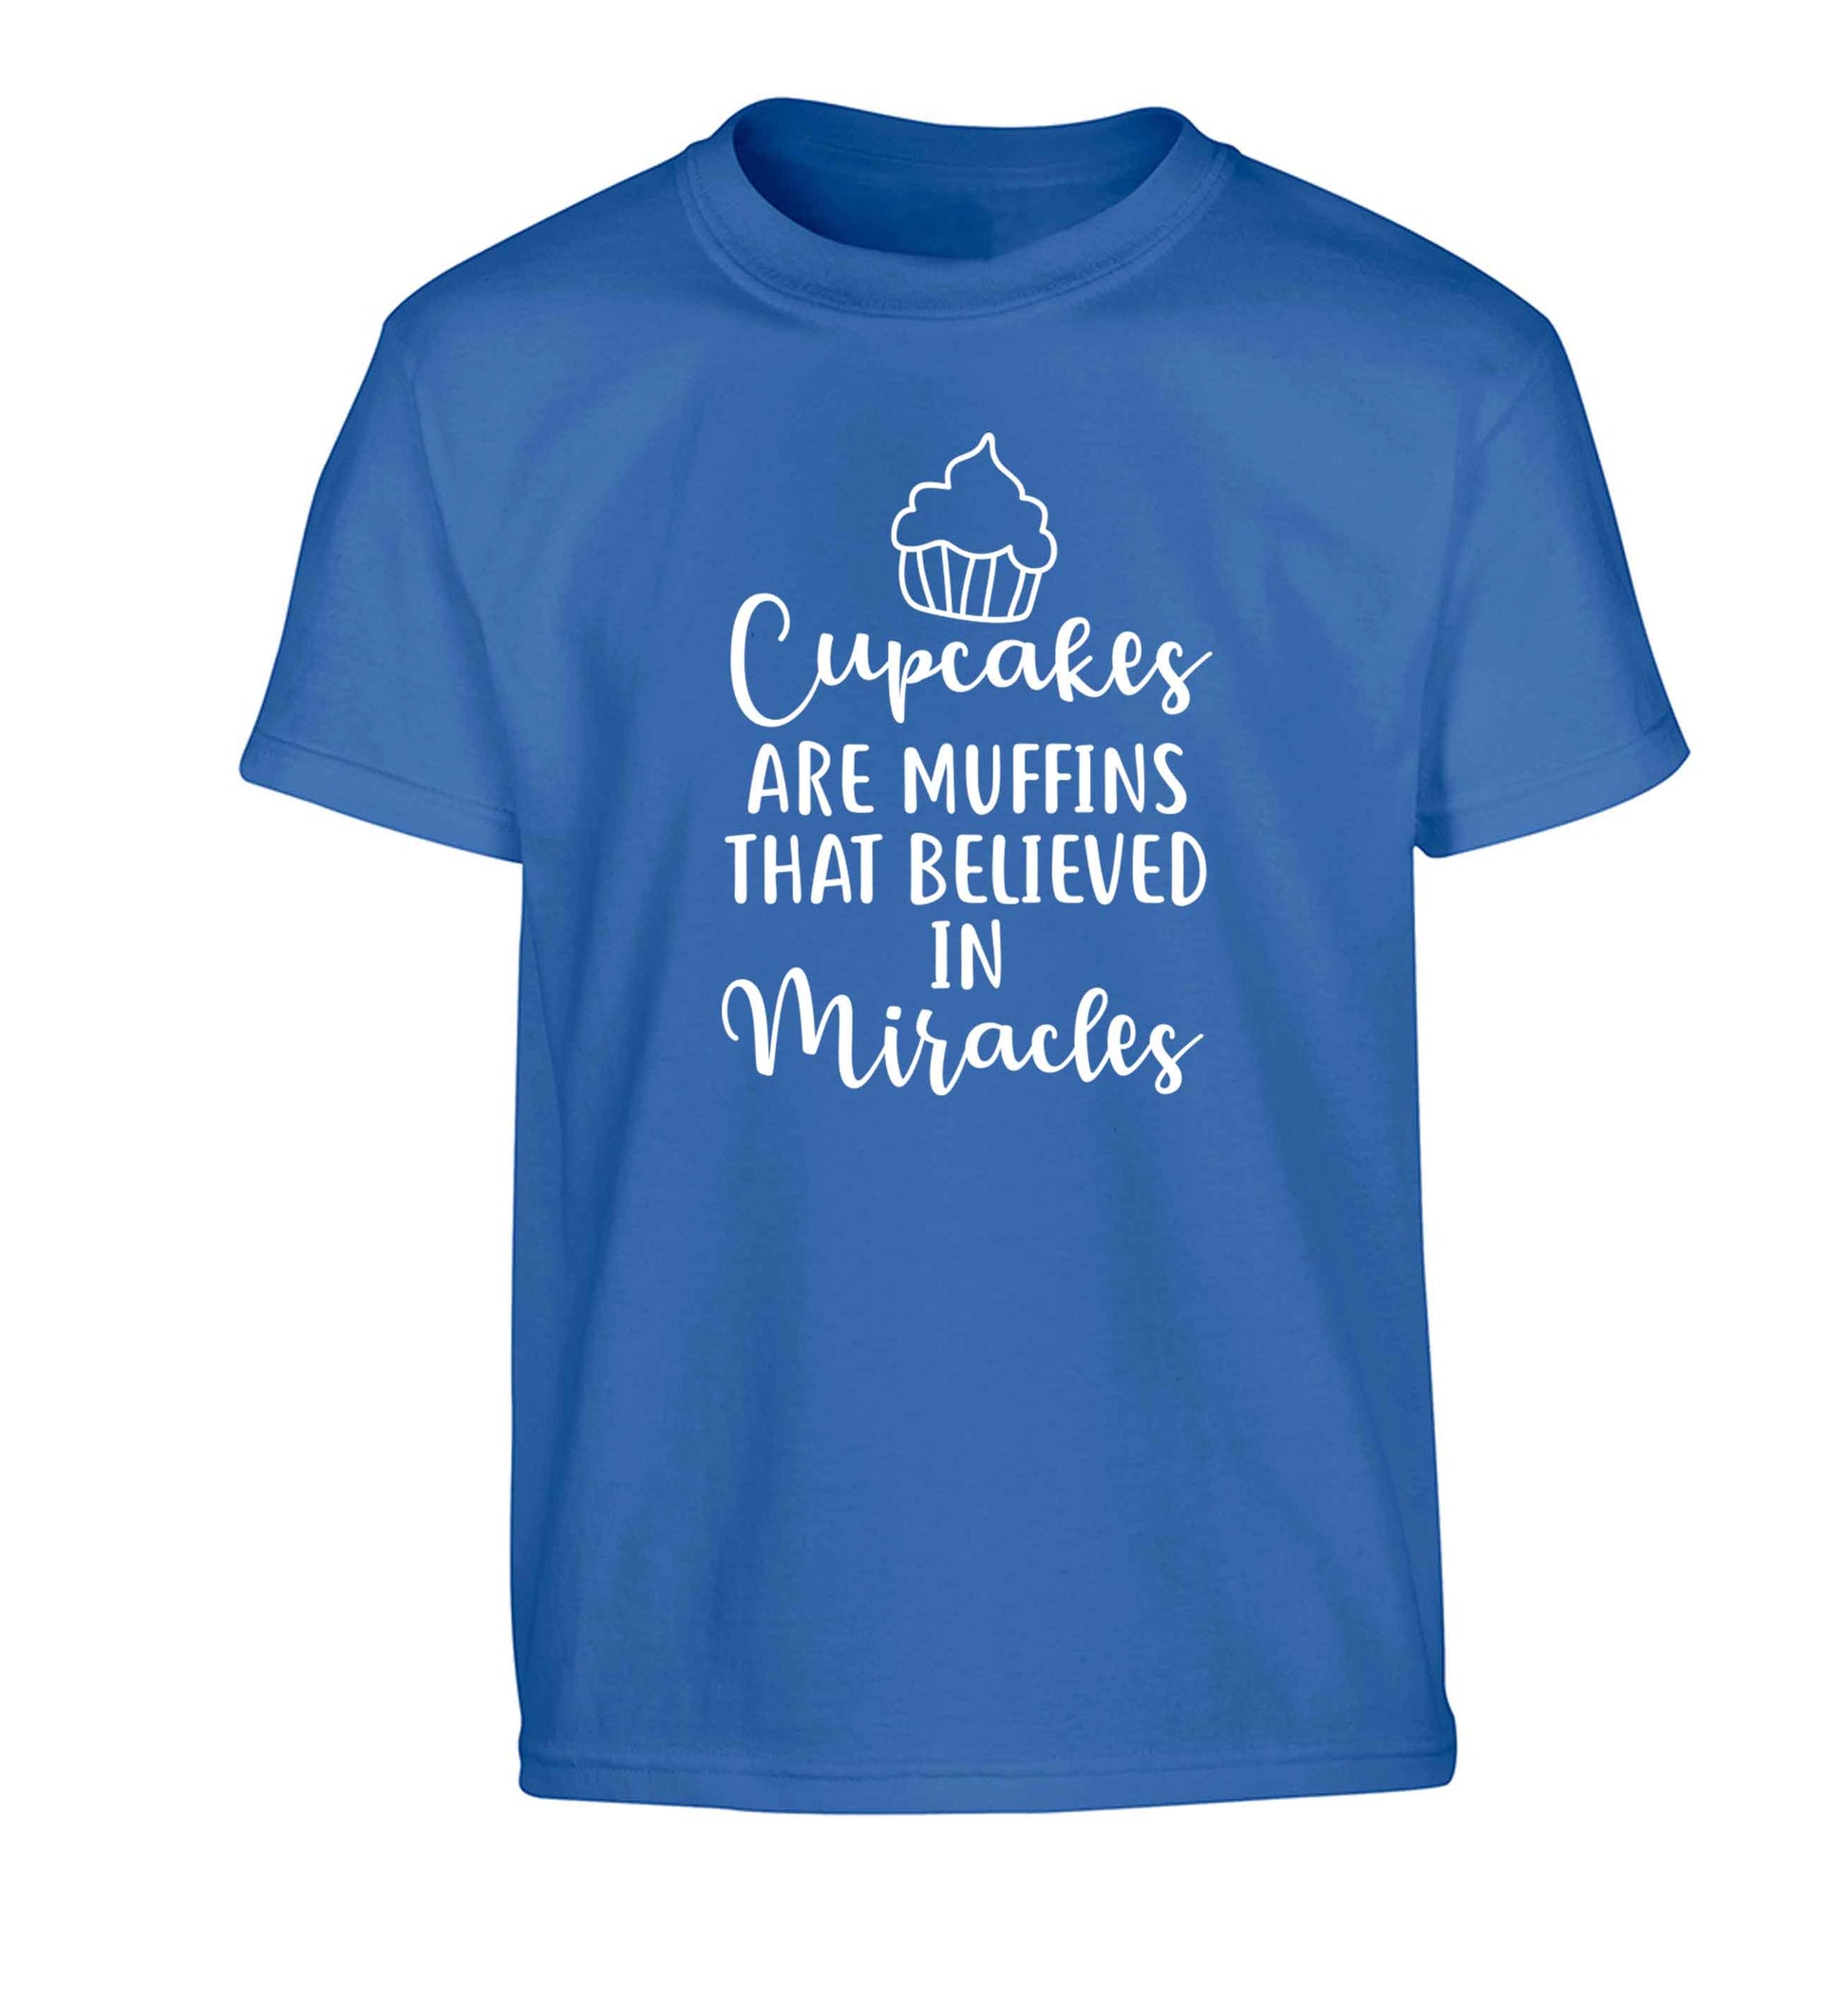 Cupcakes muffins that believed in miracles Children's blue Tshirt 12-13 Years